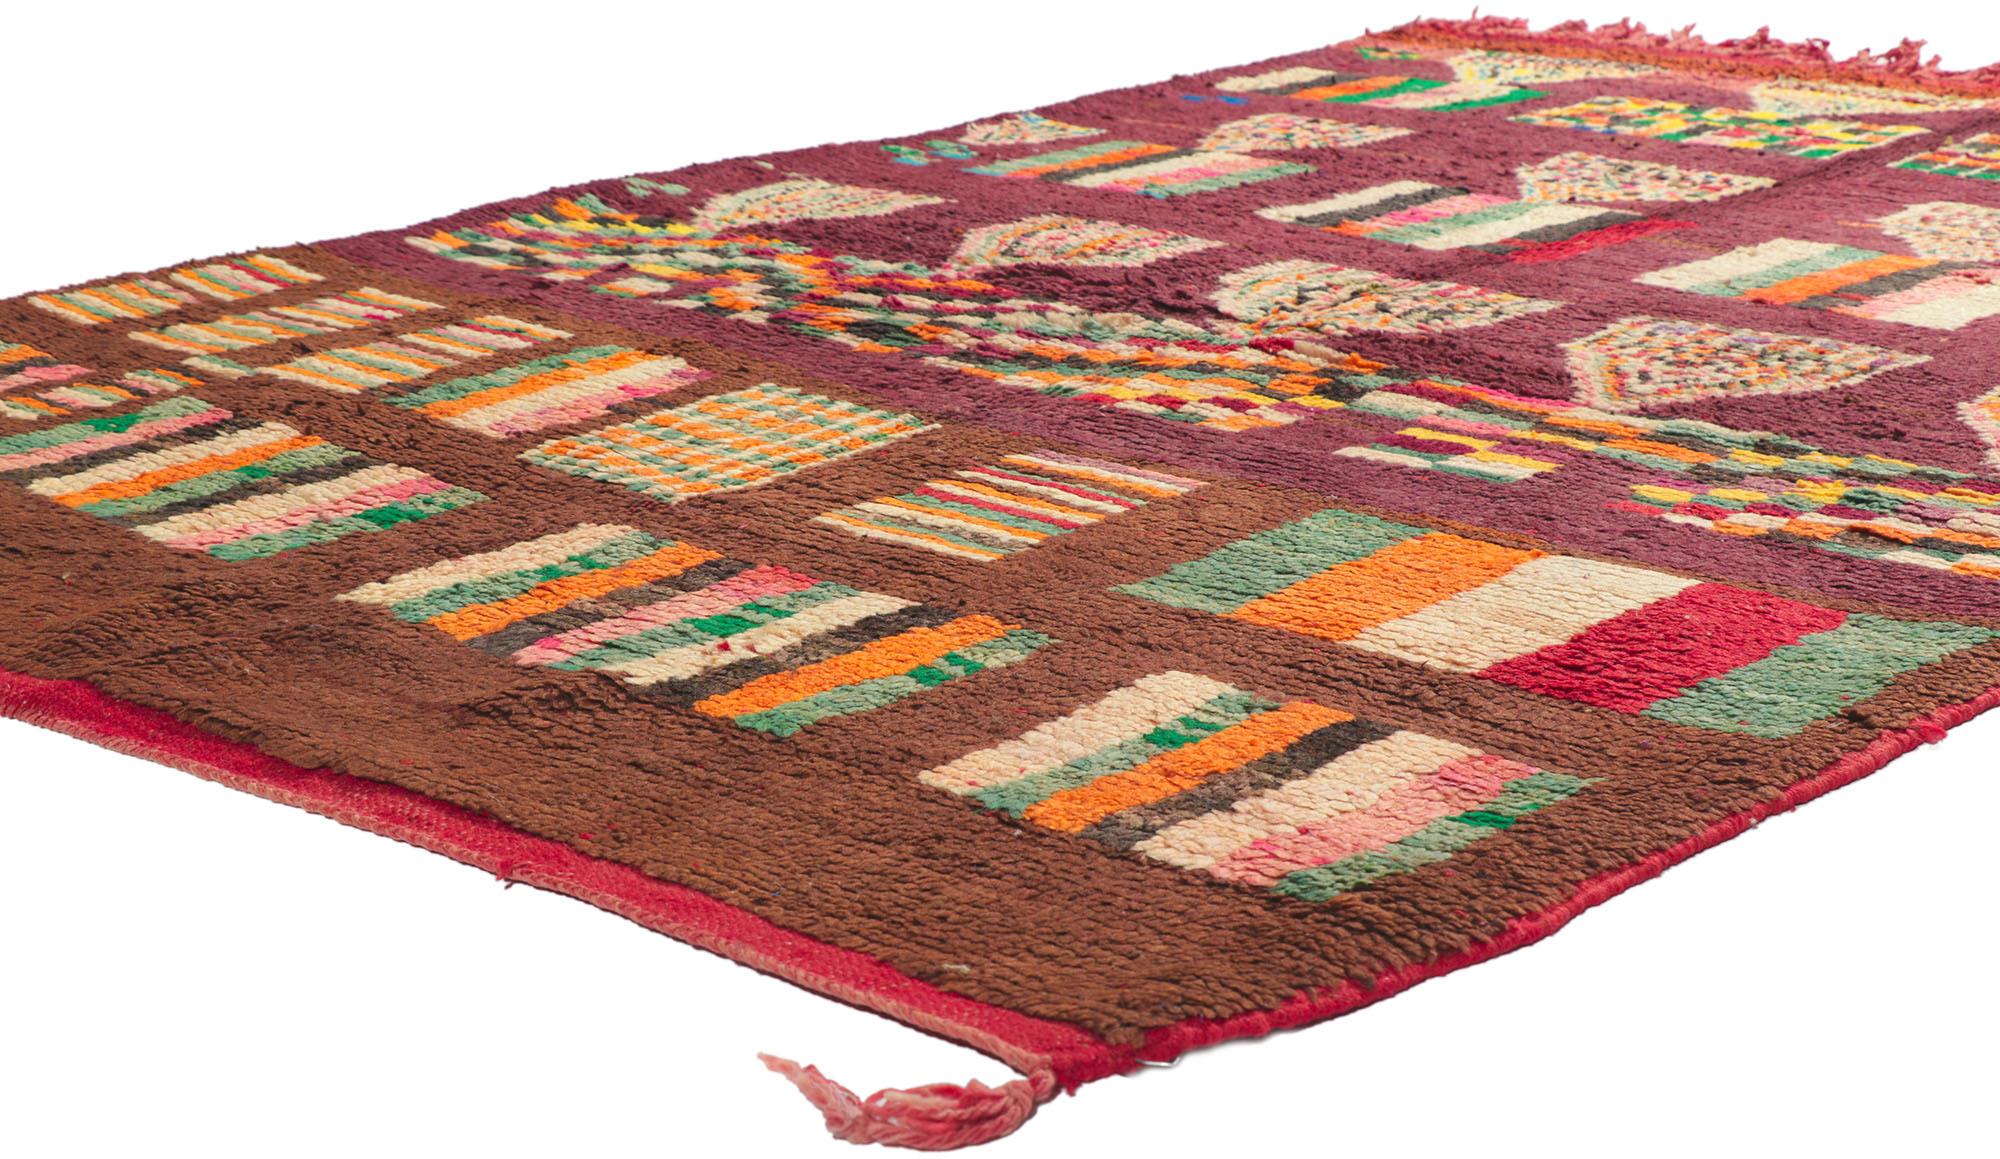 20309 Vintage Boujad Moroccan Rug with Bauhaus Style, 05'03 x 07'06. Originating from Morocco's Boujad region, Boujad rugs are more than mere floor coverings; they are exquisite handwoven masterpieces that encapsulate the vibrant artistic legacy of